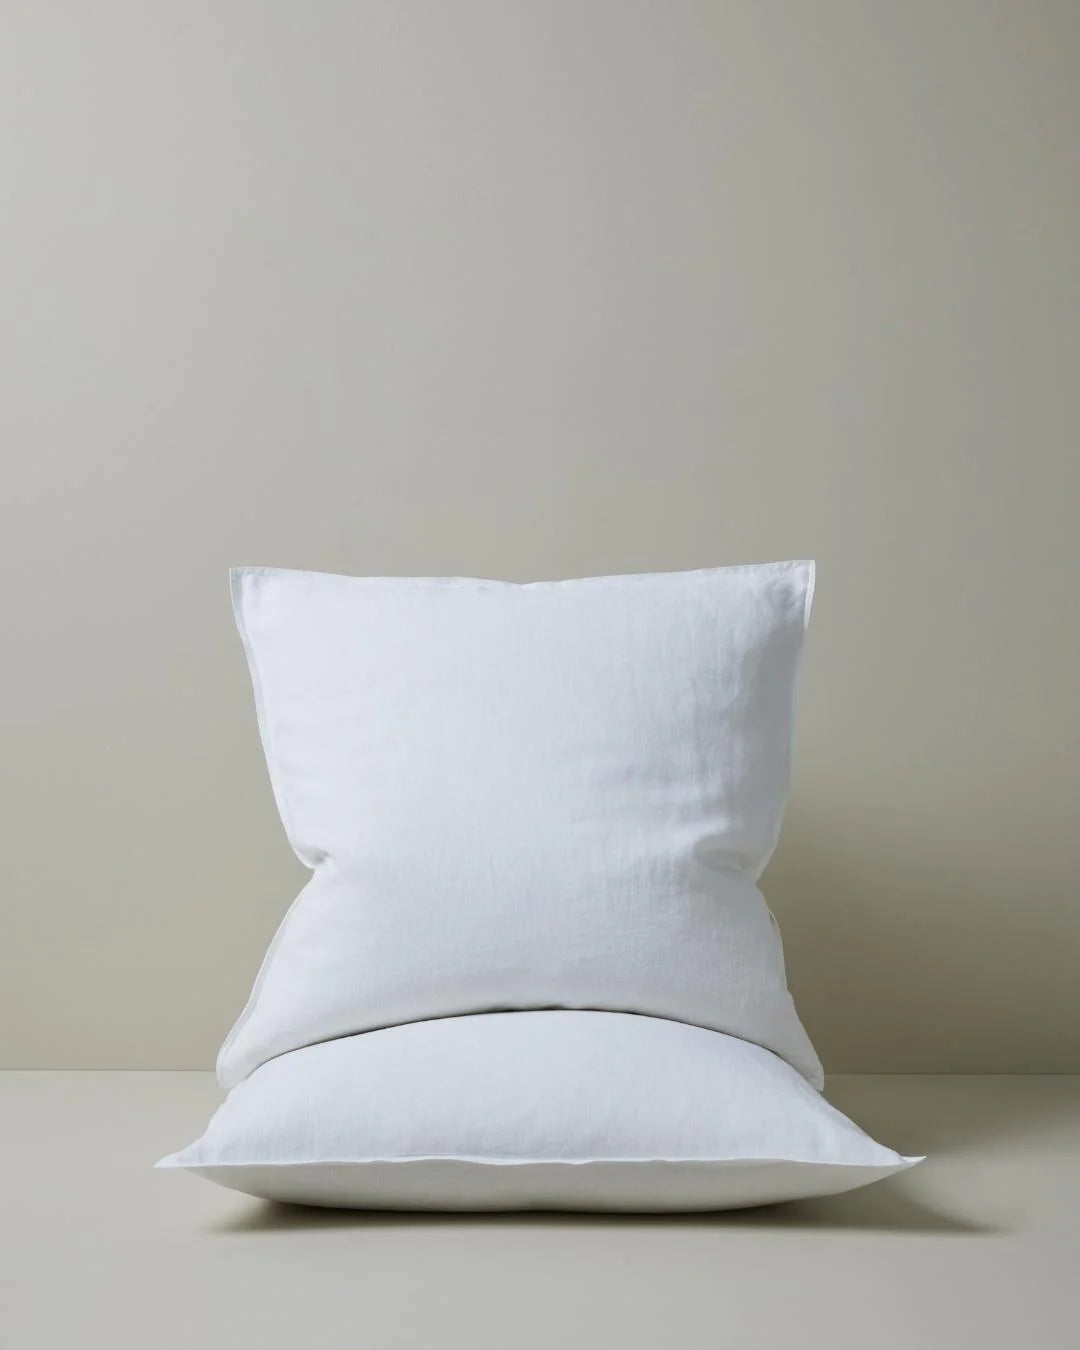 Crafted from the highest quality French Flax Linen, each product from the Ravello range is prewashed and aero finished for a unique and luxuriously soft, relaxed feel, making it a dream to rest and relax on.  The White colourway is a classic, essential shade that will match with any look and create timeless styles.